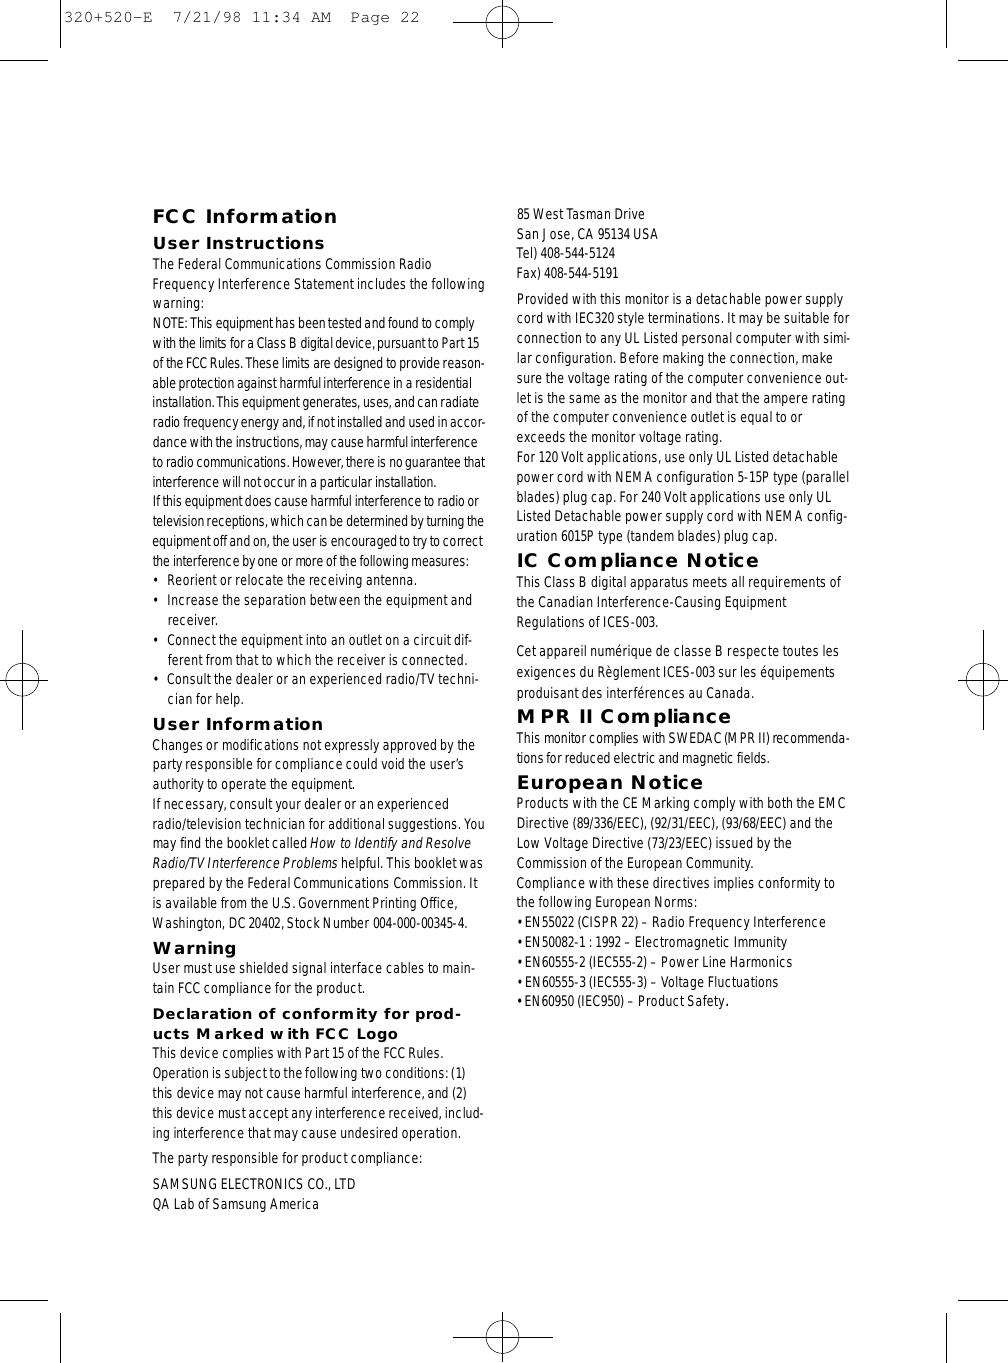 FCC InformationUser InstructionsThe Federal Communications Commission RadioFrequency Interference Statement includes the followingwarning:NOTE: This equipment has been tested and found to complywith the limits for a Class B digital device, pursuant to Part 15of the FCCRules. These limits are designed to provide re a s o n -able protection against harmful interf e rence in a re s i d e n t i a linstallation. This equipment generates, uses, and can radiateradio frequency energy and, if not installed and used in accor-dance with the instructions, may cause harmful interf e re n c eto radio communications. However, there is no guarantee thati n t e rf e r ence will not occur in a particular installation.If this equipment does cause harmful interf e rence to radio ortelevision receptions, which can be determined by turning theequipment off and on, the user is encouraged to try to corre c tthe interf e rence by one or more of the following measure s :• Reorient or relocate the receiving antenna.• Increase the separation between the equipment andreceiver.• Connect the equipment into an outlet on a circuit dif-ferent from that to which the receiver is connected.• Consult the dealer or an experienced radio/TV techni-cian for help.User InformationChanges or modifications not expressly approved by thep a rty responsible for compliance could void the user’sauthority to operate the equipment.If necessary, consult your dealer or an experiencedradio/television technician for additional suggestions. Yo umay find the booklet called How to Identify and ResolveRadio/TV Interf e r ence Pro b l e m shelpful. This booklet wasp re p a red by the Federal Communications Commission. Itis available from the U.S. Government Printing Off i c e ,Washington, DC 20402, Stock Number 004-000-00345-4.WarningUser must use shielded signal interface cables to main-tain FCC compliance for the product.Declaration of conformity for prod-ucts Marked with FCC LogoThis device complies with Part 15 of the FCC Rules.Operation is subject to the following two conditions: (1)this device may not cause harmful interf e rence, and (2)this device must accept any interf e r ence received, includ-ing interference that may cause undesired operation.The party responsible for product compliance:SAMSUNG ELECTRONICS CO., LTDQA Lab of Samsung America85 West Tasman Drive San Jose, CA 95134 USATel) 408-544-5124Fax) 408-544-5191Provided with this monitor is a detachable power supplycord with IEC320 style terminations. It may be suitable forconnection to any UL Listed personal computer with simi-lar configuration. Before making the connection, makesure the voltage rating of the computer convenience out-let is the same as the monitor and that the ampere ratingof the computer convenience outlet is equal to orexceeds the monitor voltage rating. For 120 Volt applications, use only UL Listed detachablepower cord with NEMA configuration 5-15P type (parallelblades) plug cap. For 240 Volt applications use only ULListed Detachable power supply cord with NEMA config-uration 6015P type (tandem blades) plug cap.IC Compliance NoticeThis Class B digital apparatus meets all requirements ofthe Canadian Interference-Causing EquipmentRegulations of ICES-003.Cet appareil numérique de classe B respecte toutes lesexigences du Règlement ICES-003 sur les équipementsproduisant des interférences au Canada.MPR II ComplianceThis monitor complies with SWEDAC (MPR II) re c o m m e n d a-tions for reduced electric and magnetic fields.European NoticeProducts with the CE Marking comply with both the EMCDirective (89/336/EEC), (92/31/EEC), (93/68/EEC) and theLow Voltage Directive (73/23/EEC) issued by theCommission of the European Community.Compliance with these directives implies conformity tothe following European Norms:• EN55022 (CISPR 22) – Radio Frequency Interference• EN50082-1 : 1992 – Electromagnetic Immunity• EN60555-2 (IEC555-2) – Power Line Harmonics• EN60555-3 (IEC555-3) – Voltage Fluctuations• EN60950 (IEC950) – Product Safety.320+520-E  7/21/98 11:34 AM  Page 22